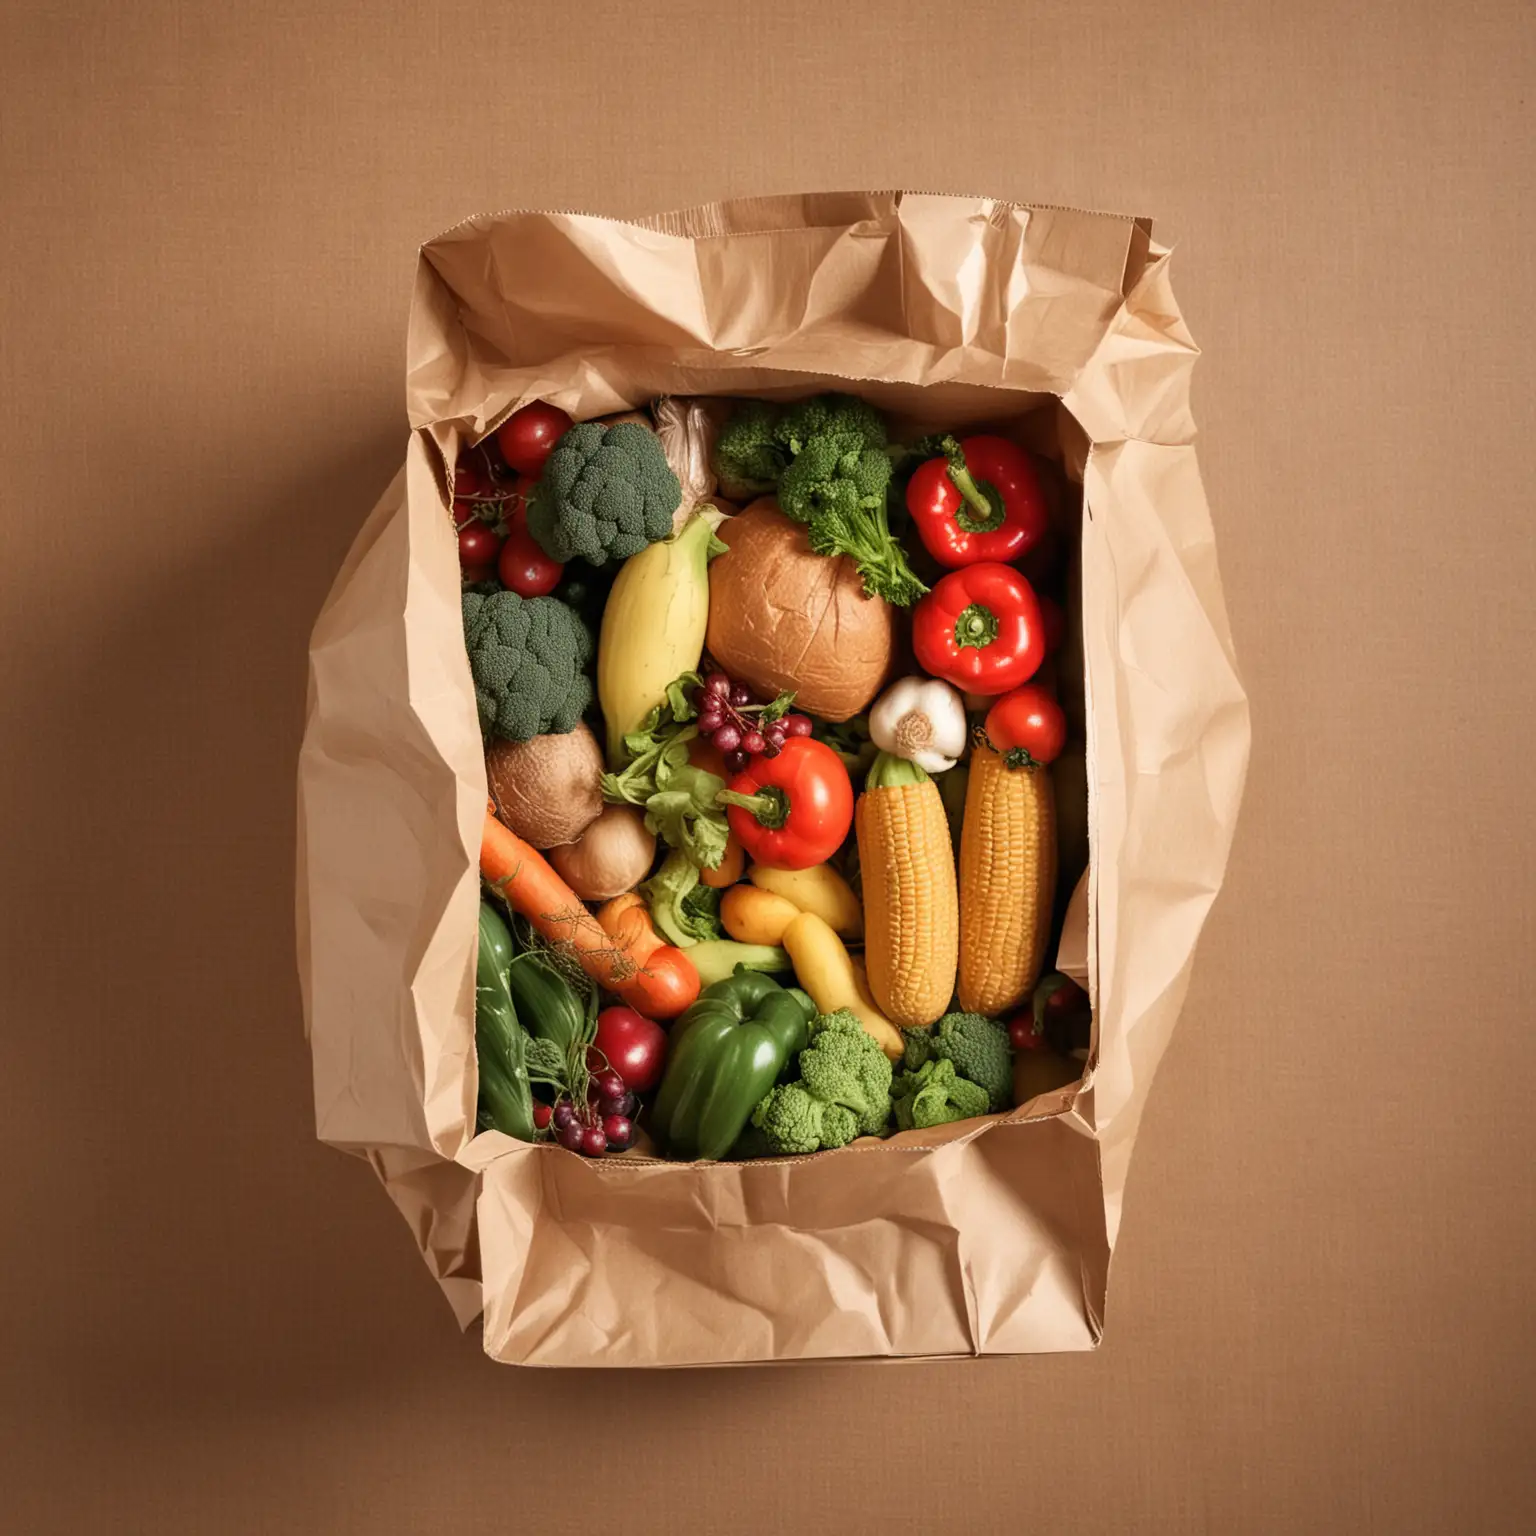 Top View of Grocery Bag with Full Contents